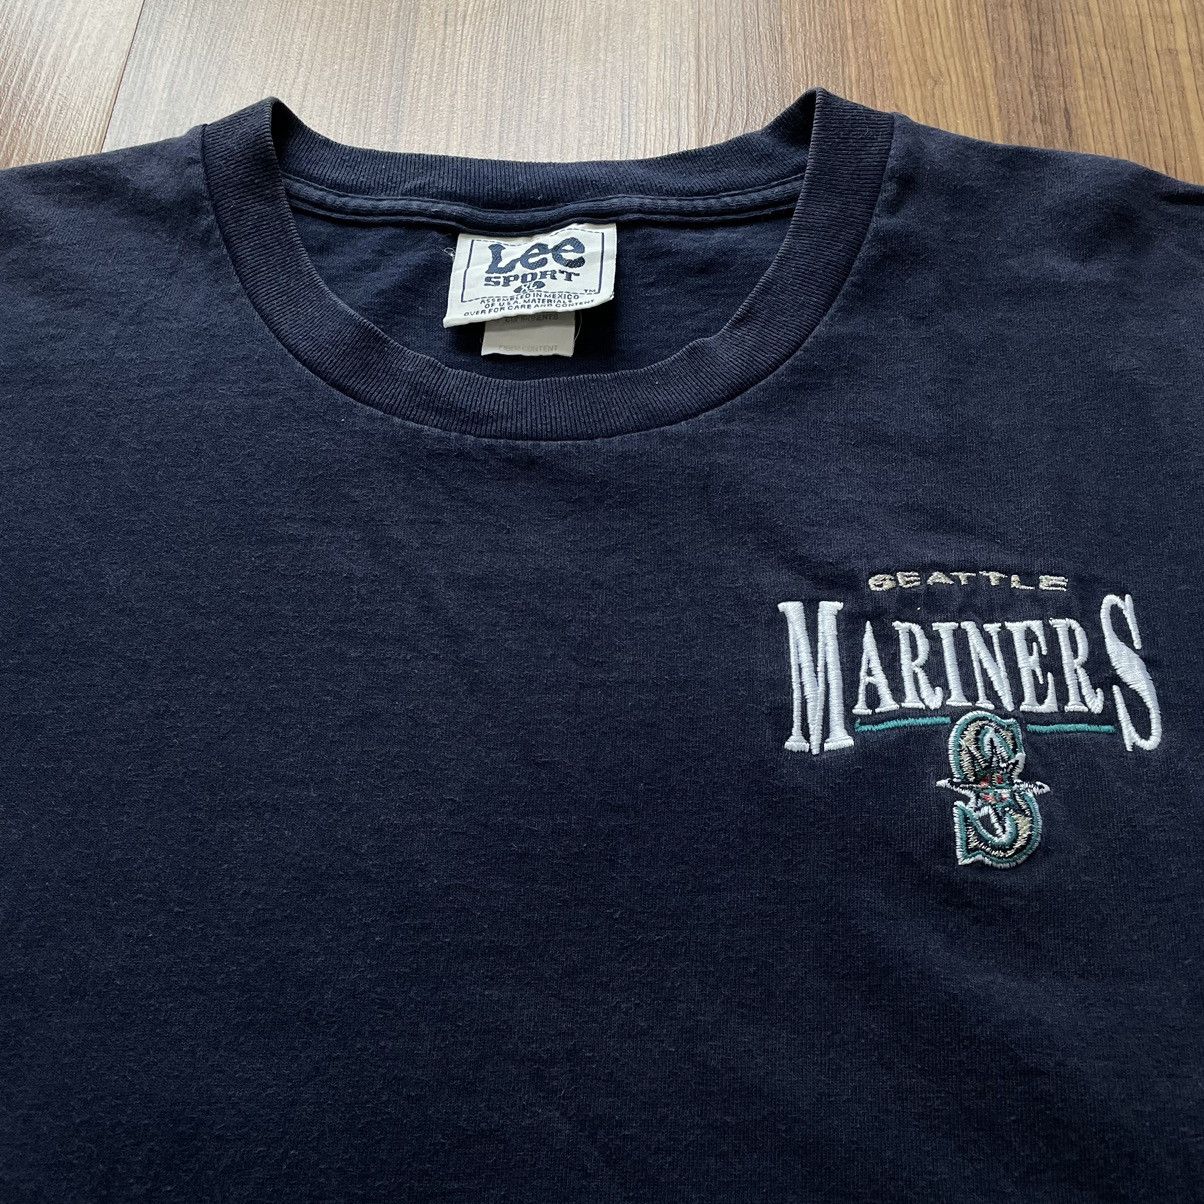 VINTAGE LEE SEATTLE MARINERS BASEBALL BUTTON UP MENS SHIRT SIZE XL